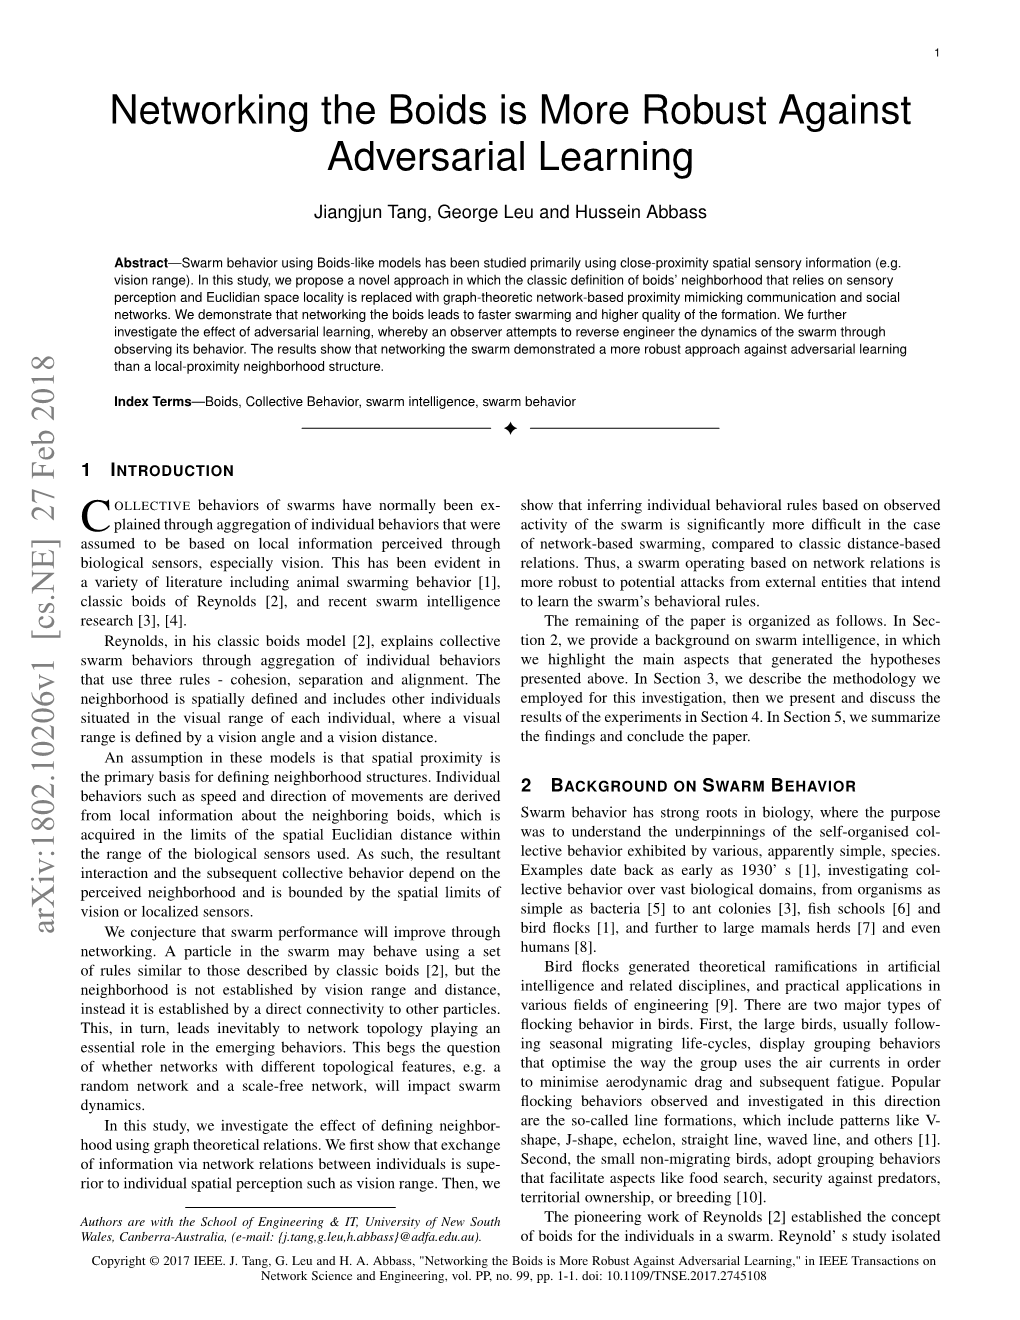 Networking the Boids Is More Robust Against Adversarial Learning